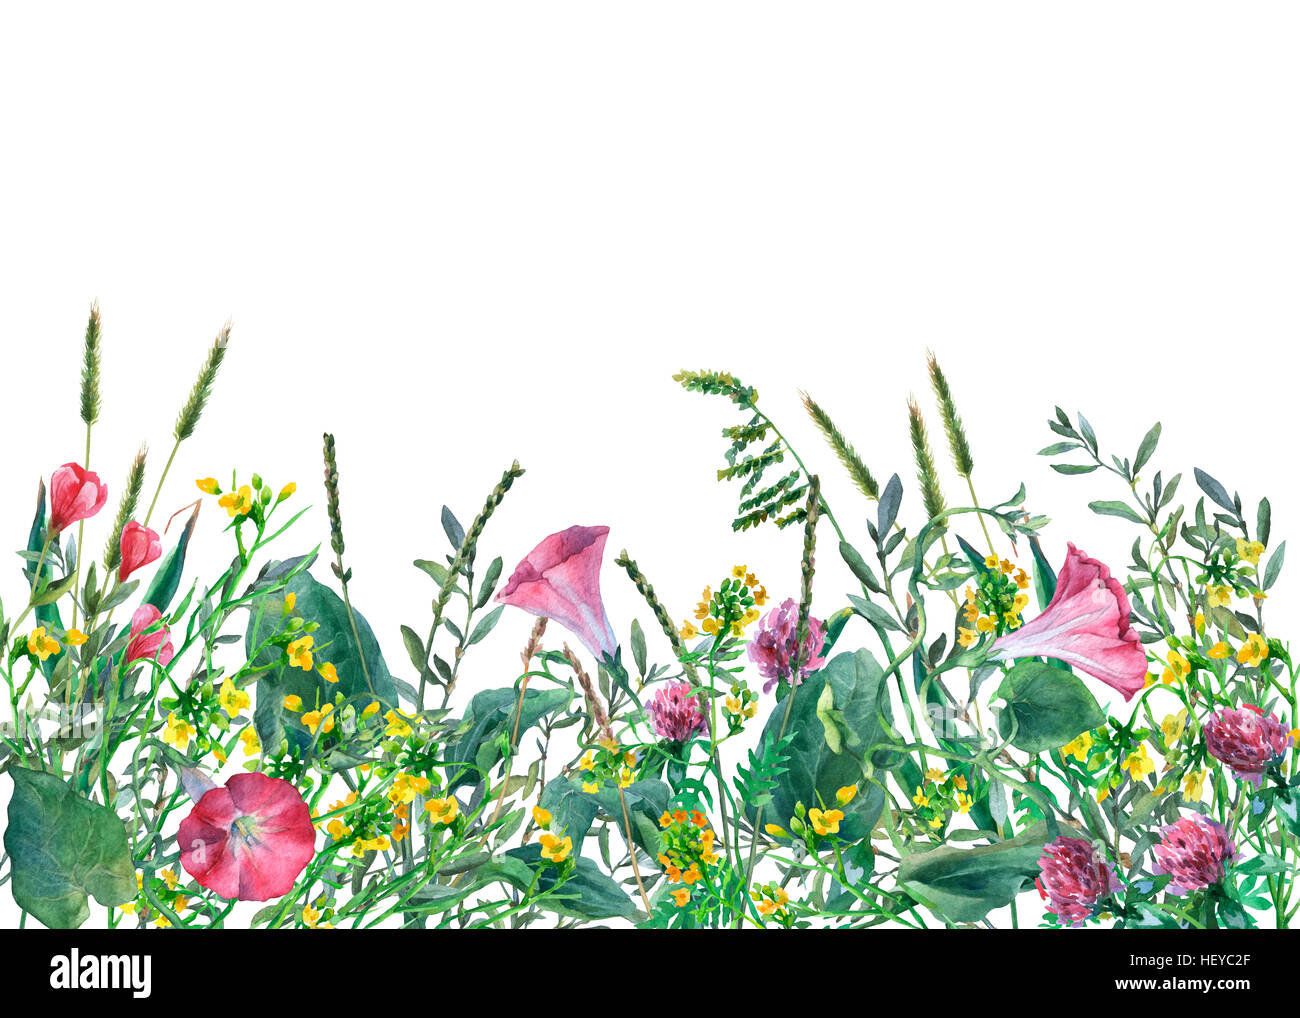 Panoramic view of wild meadow flowers and grass on  white background. Watercolor hand drawn border with flowers and herbs. Stock Photo